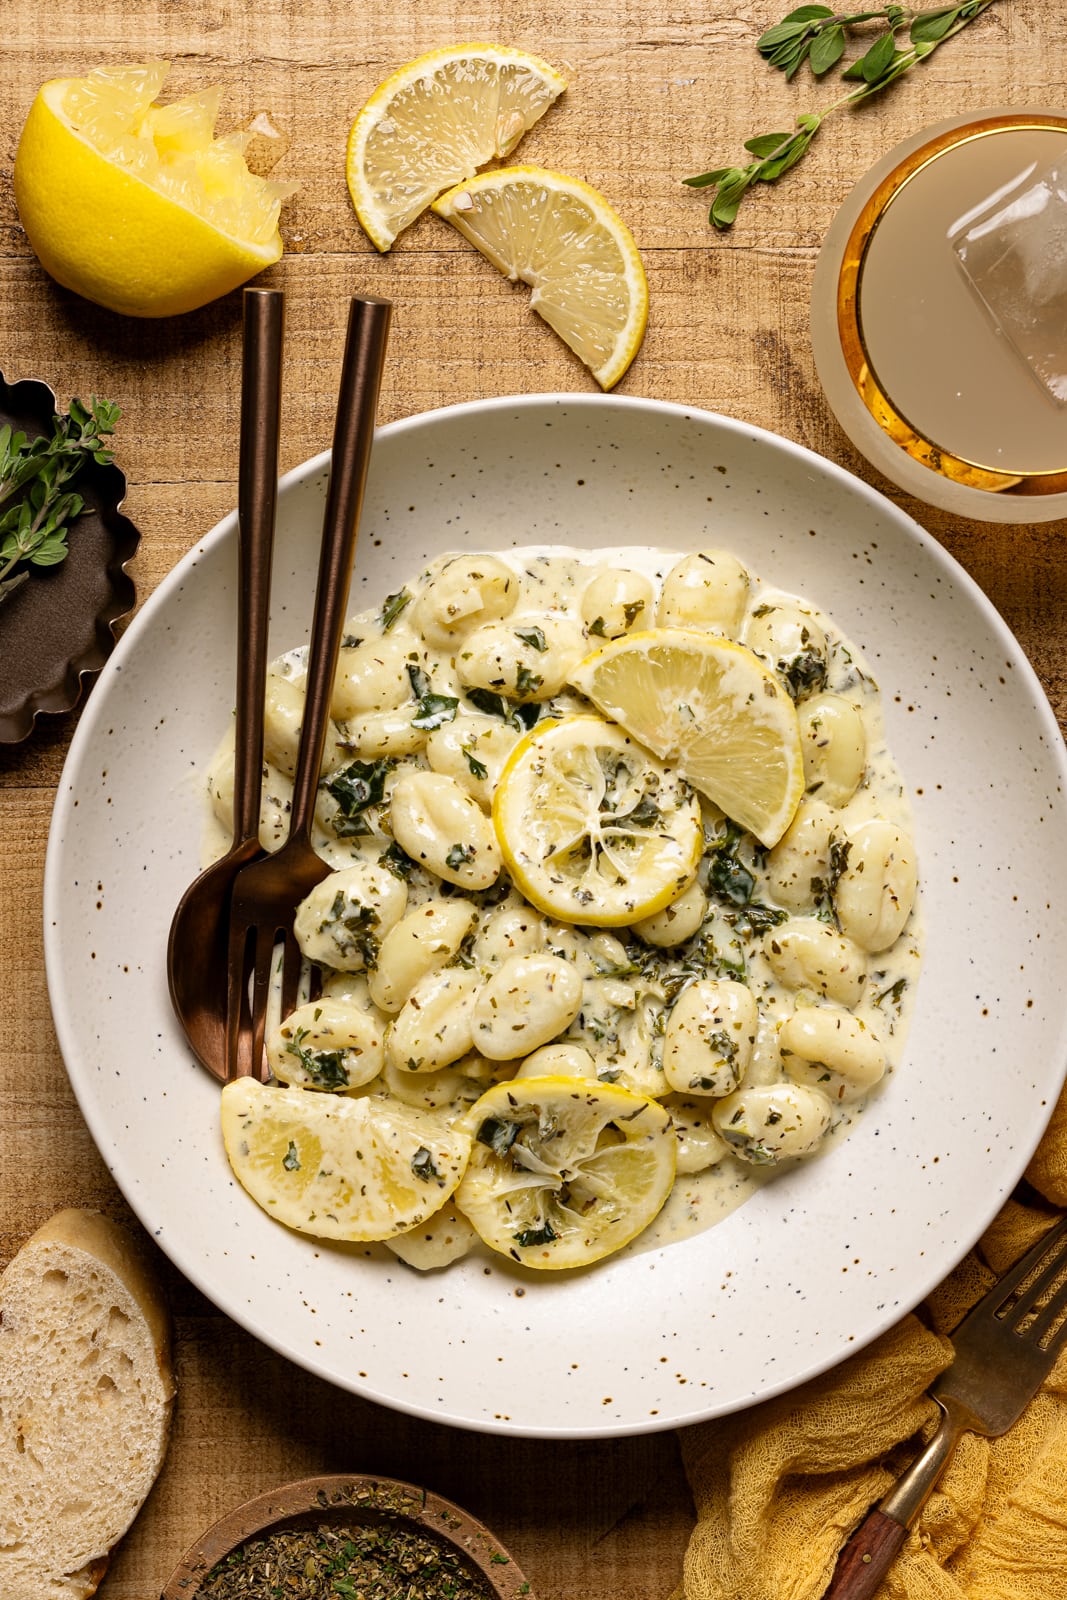 Gnocchi in a plate with a fork + spoon with a side of drink, lemons, and herbs.